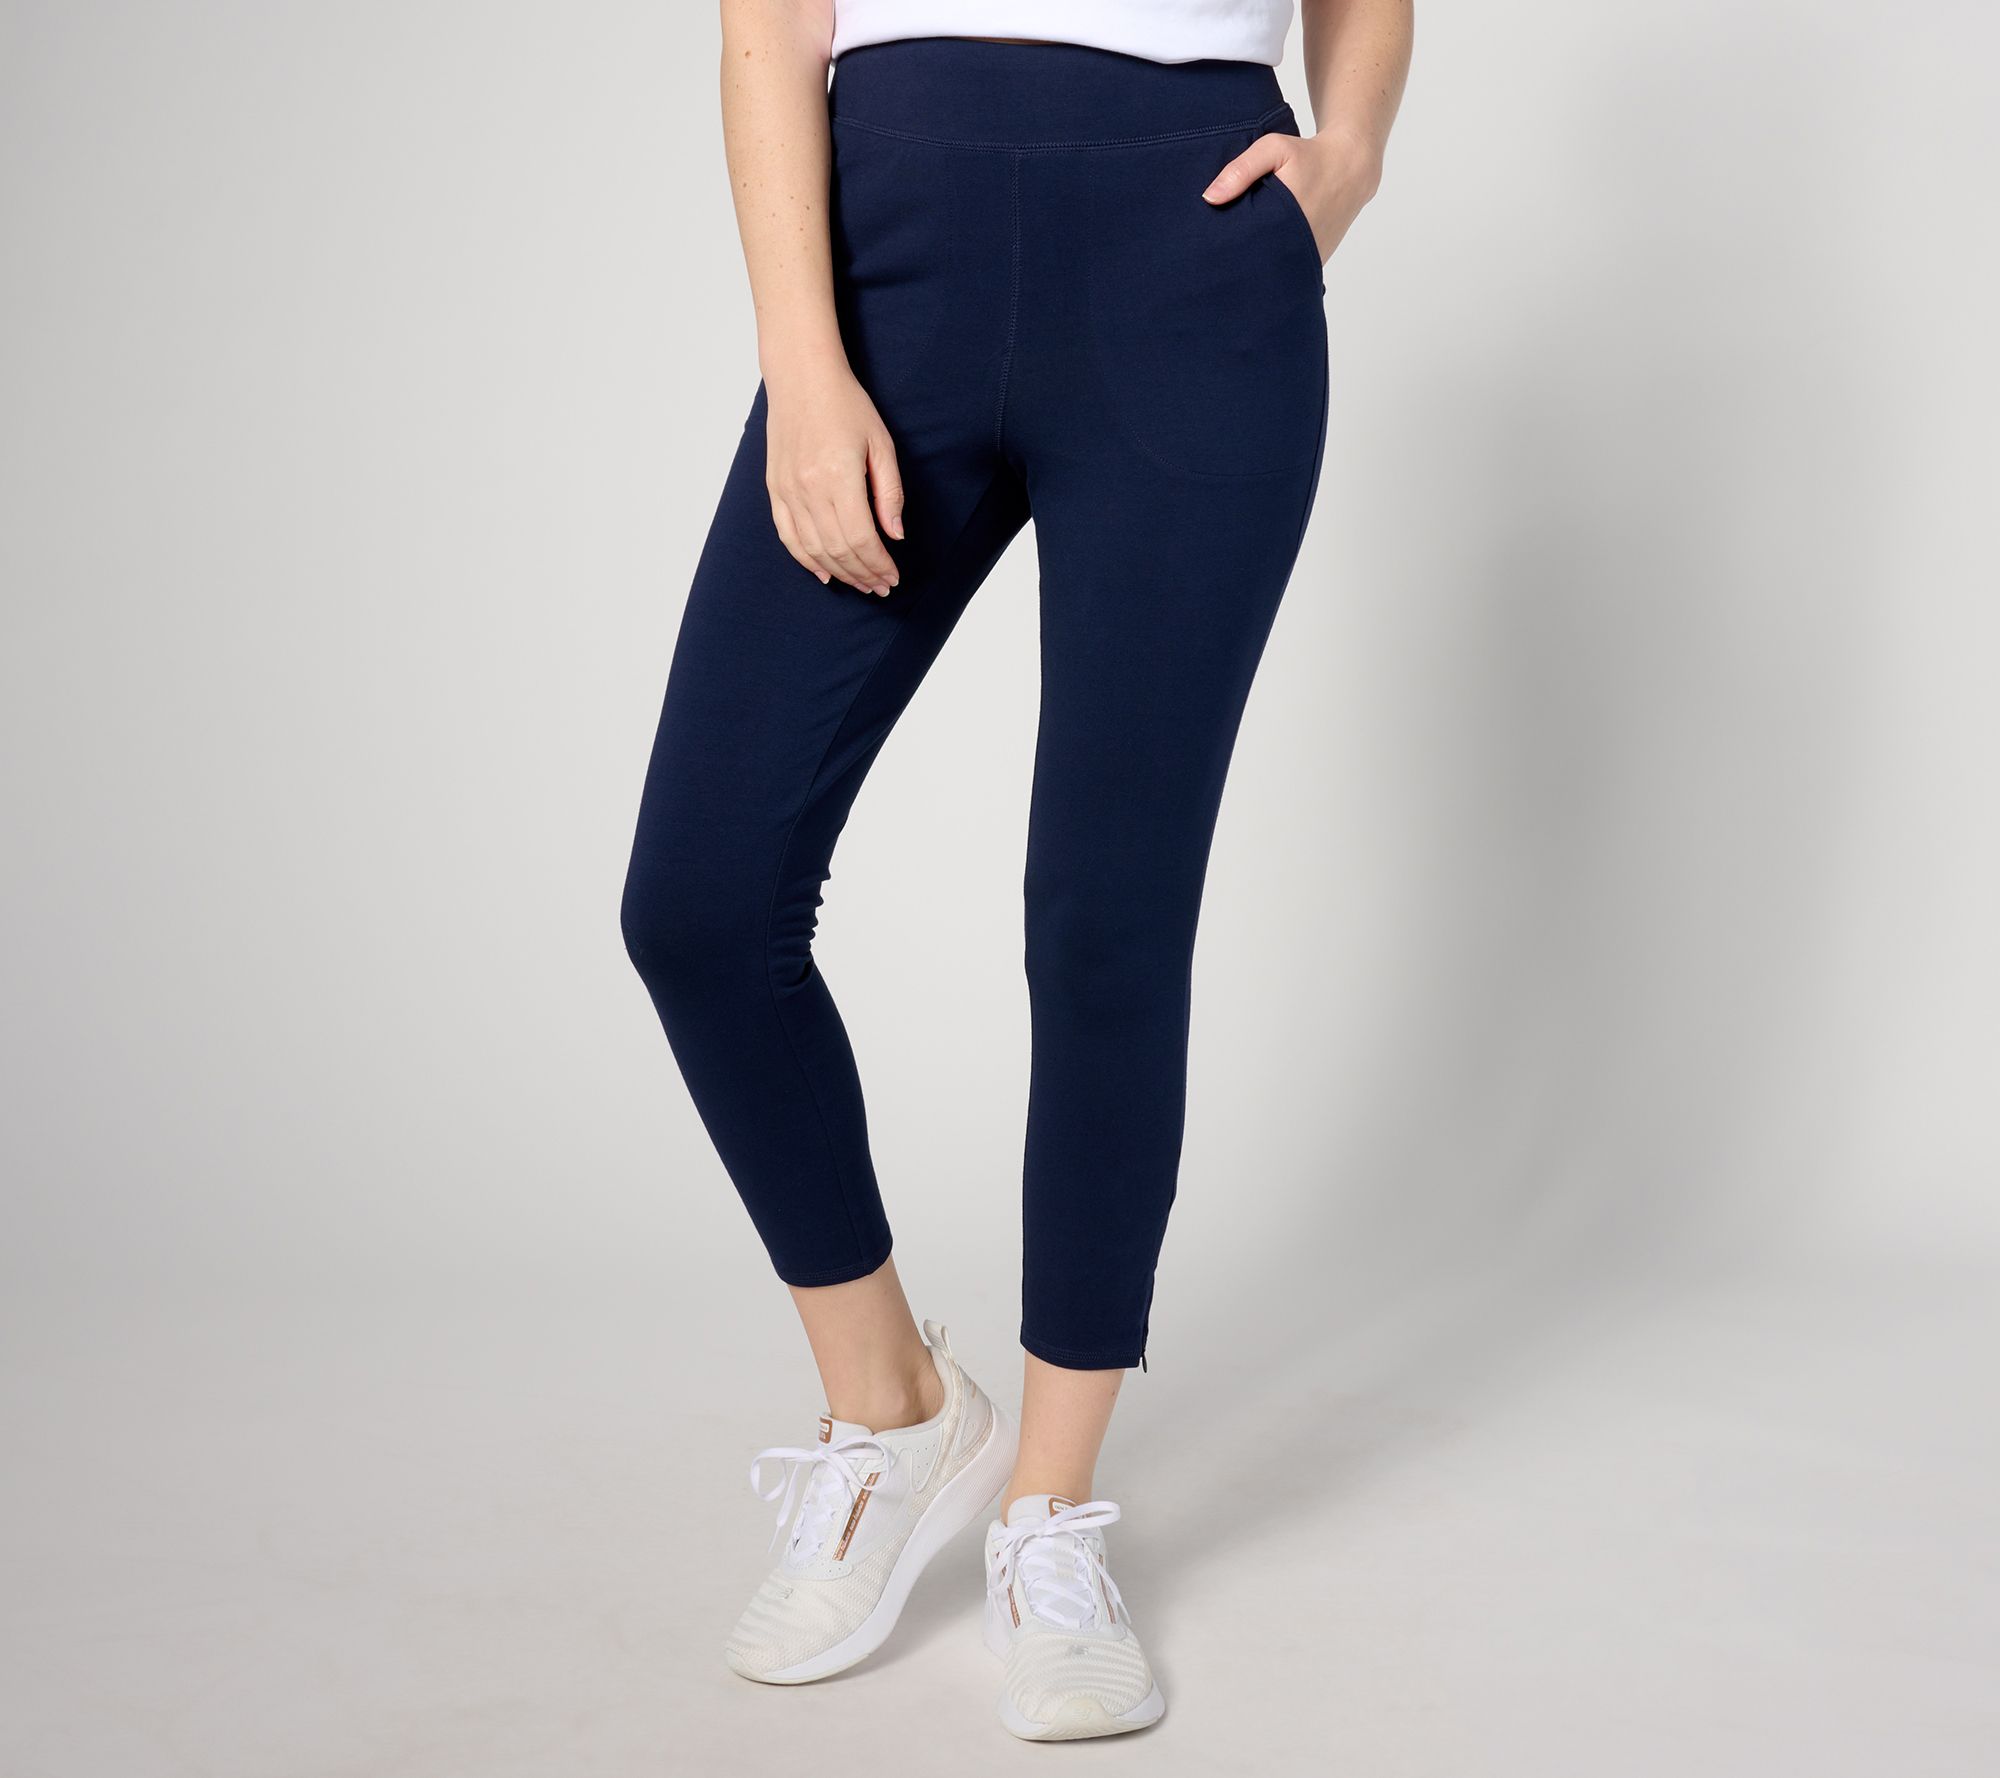 Denim & Co. Active Petite Duo Stretch Leggings with Wide Waistband 